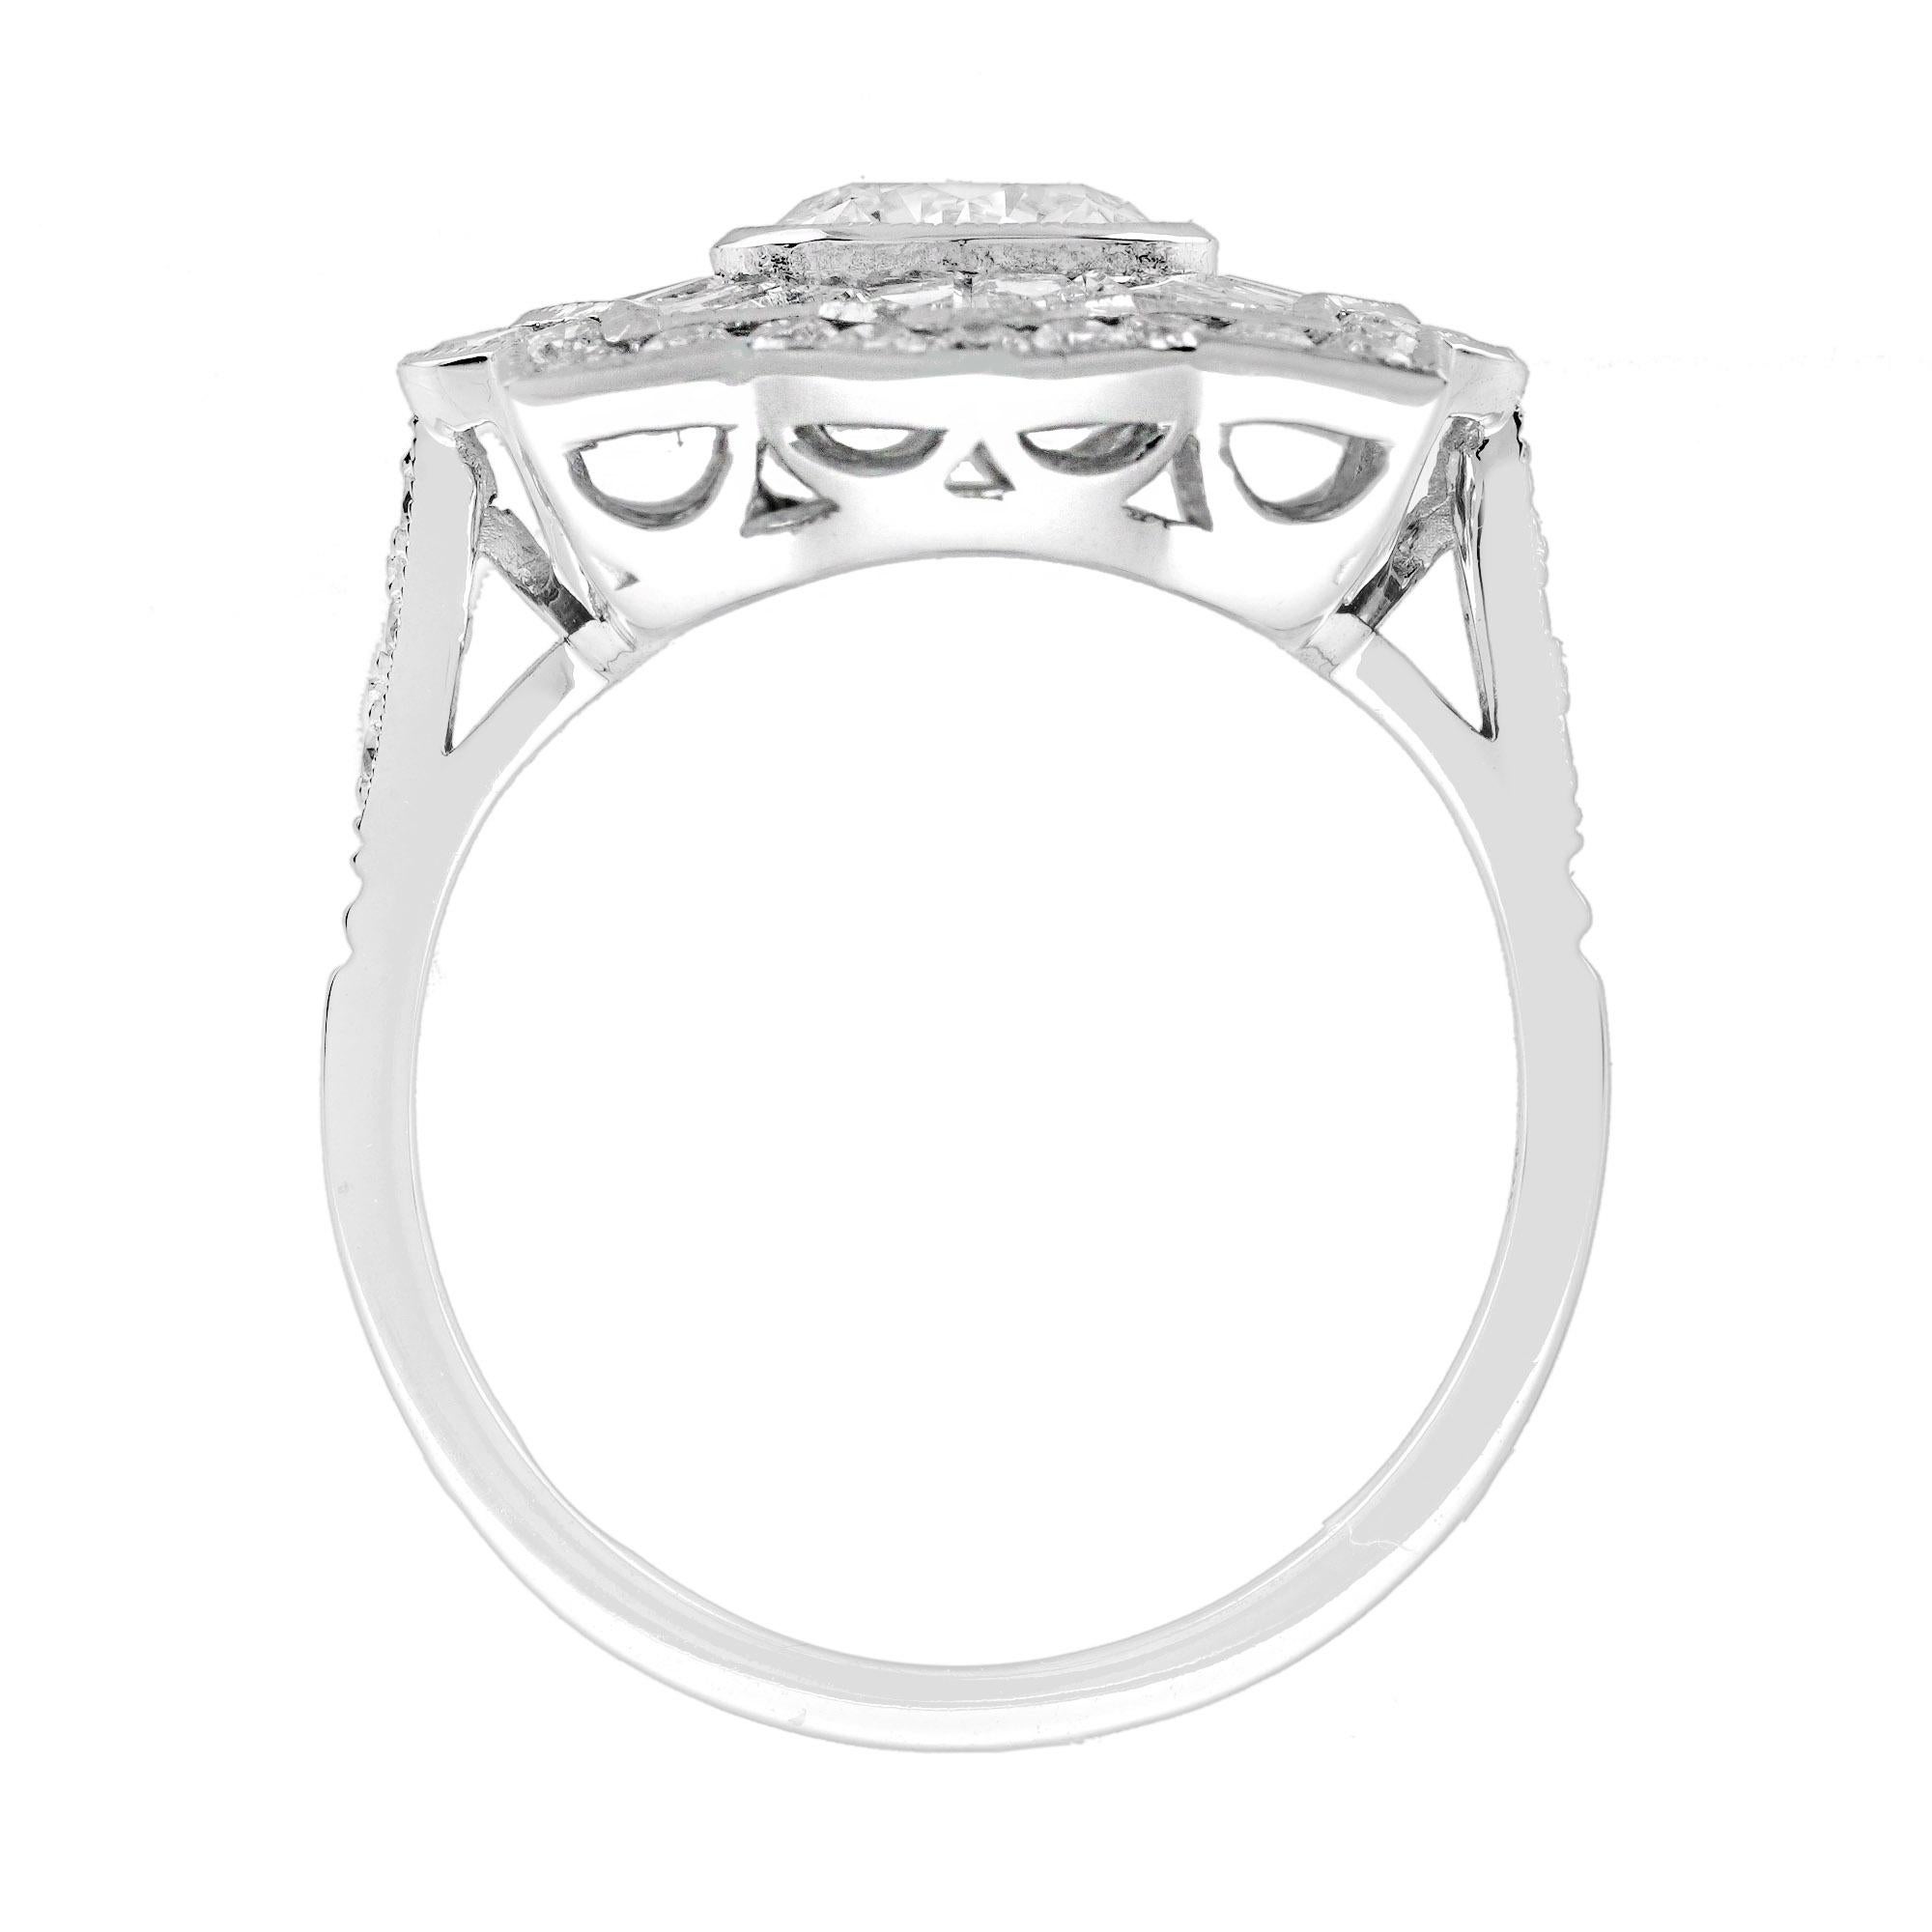 For Sale:  1.00 Ct. Diamond Art Deco Style Target Engagement Ring in 18K White Gold 8